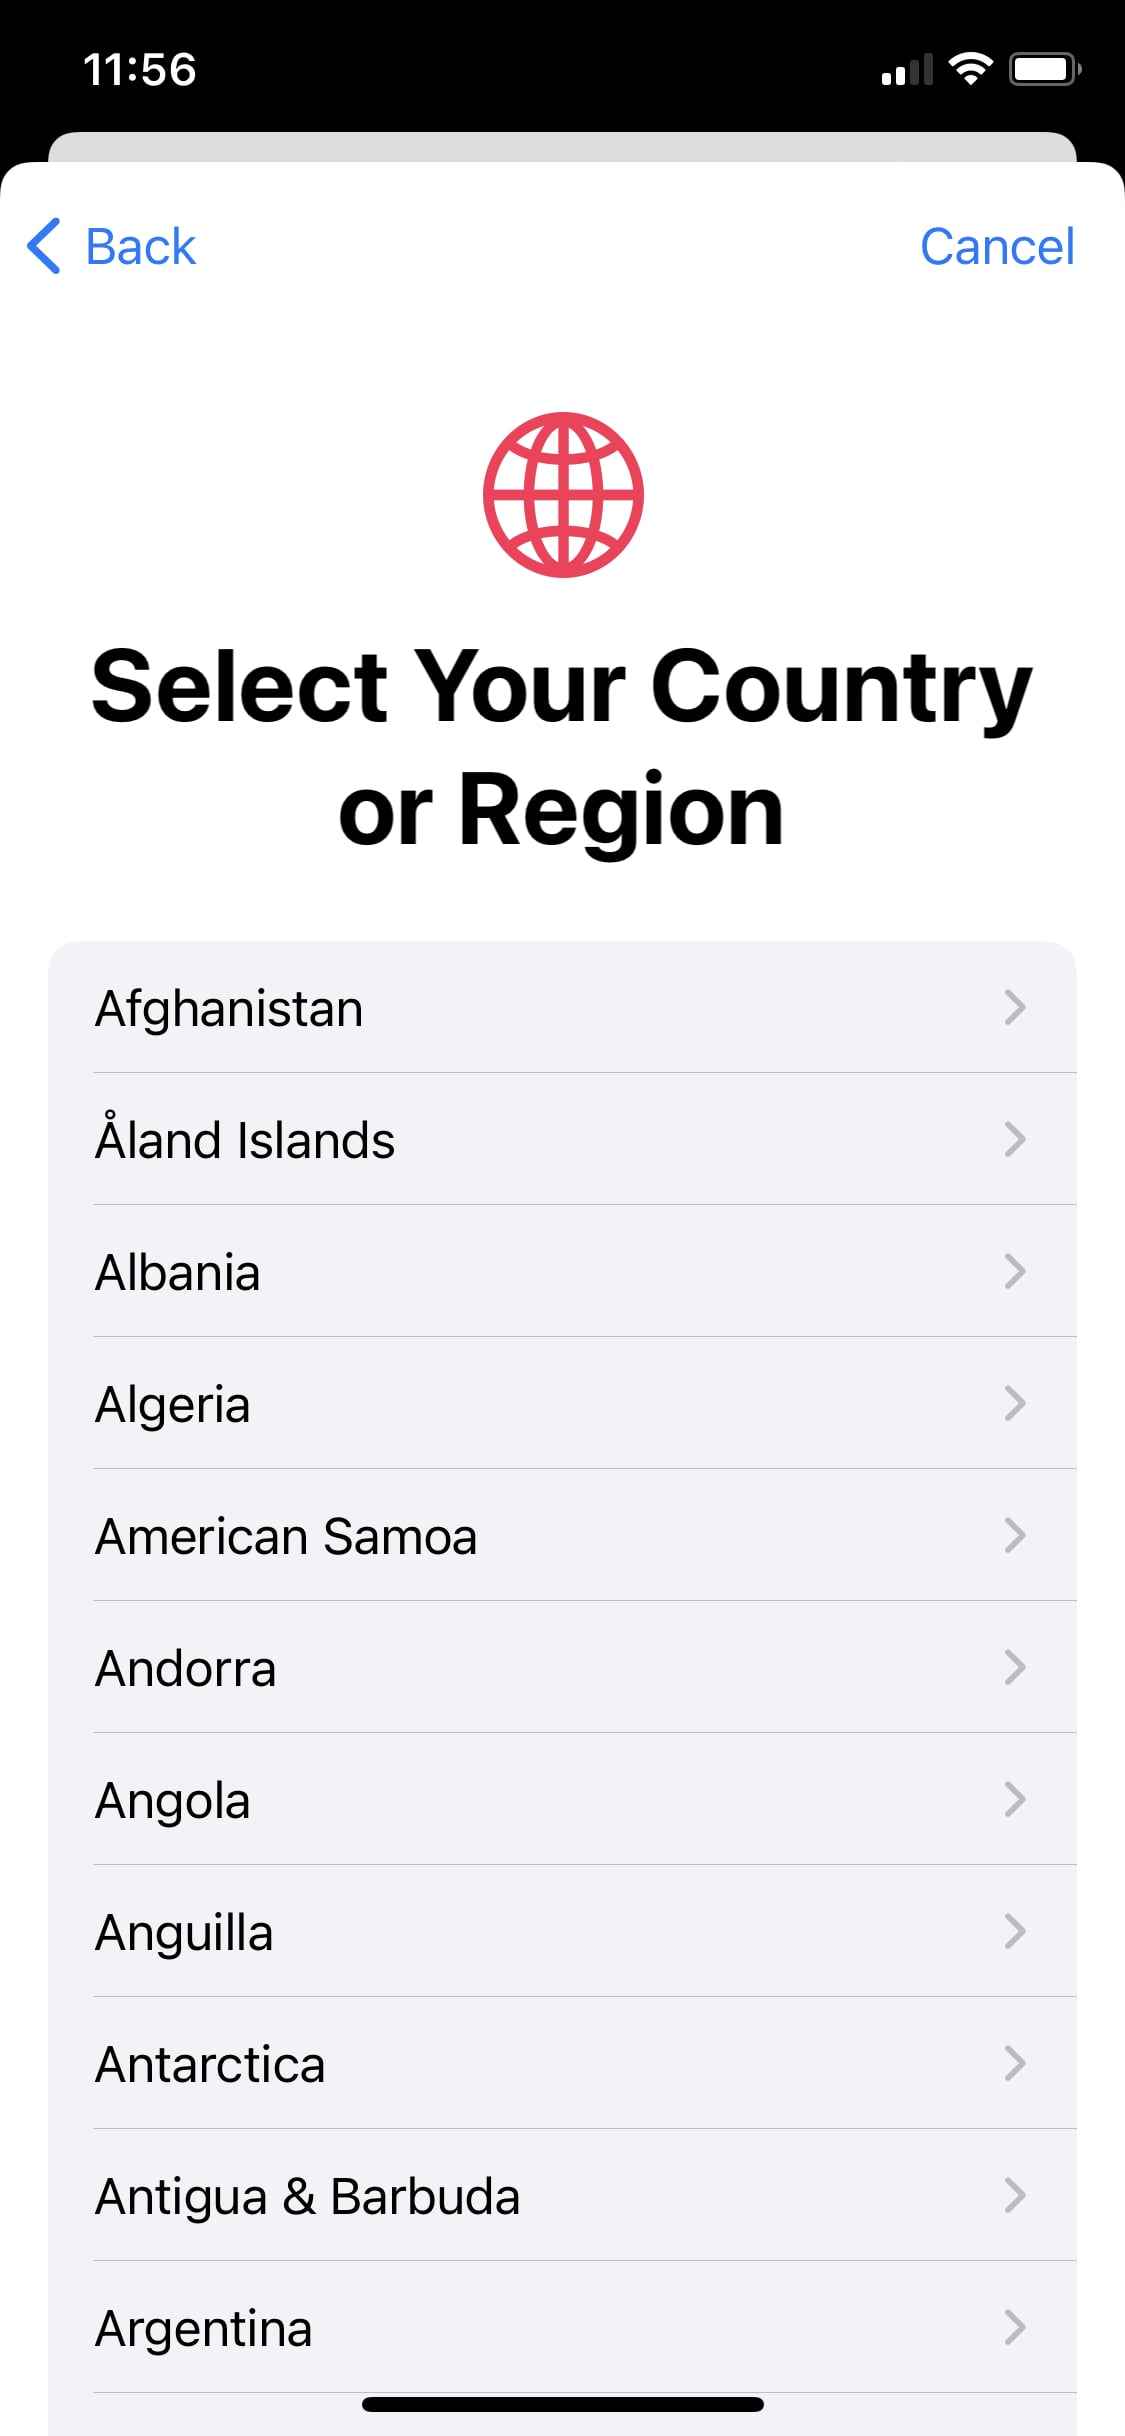 Select Your Region